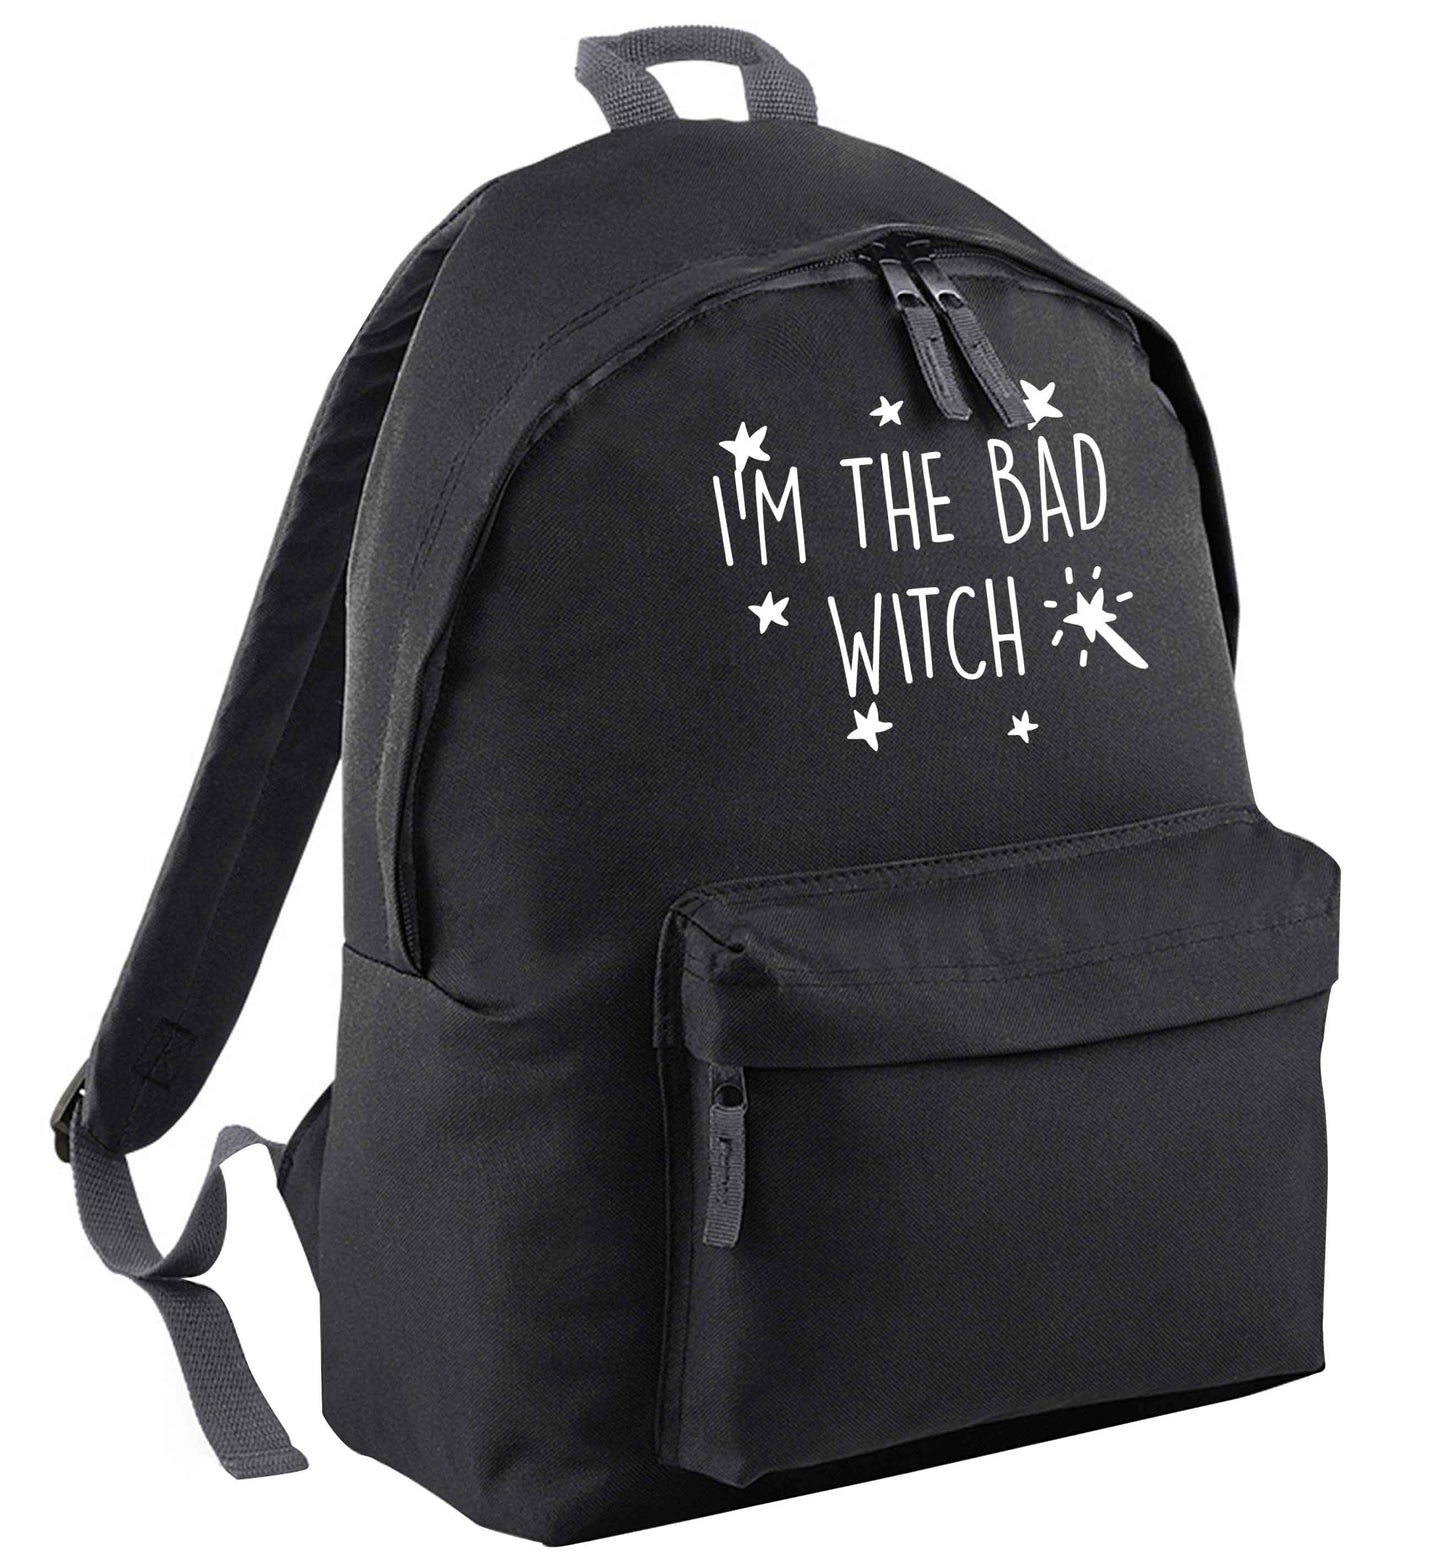 Bad witch black adults backpack